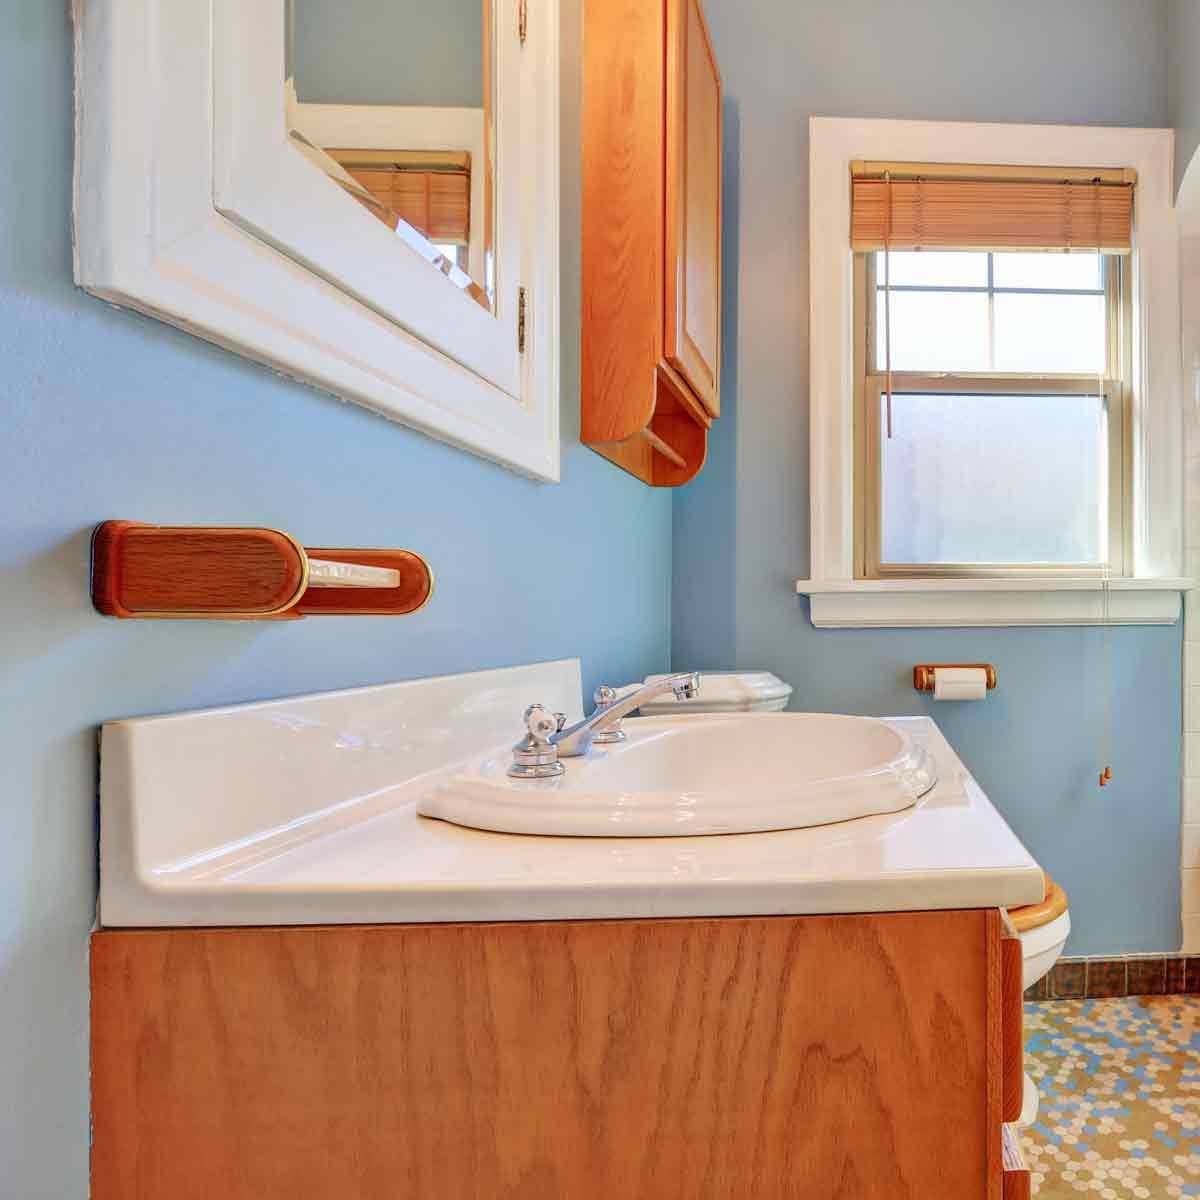 Pale-blue-colorful-bathroom-interior-with-old-fashioned-ceramic-appliances-in-tudor-style-home